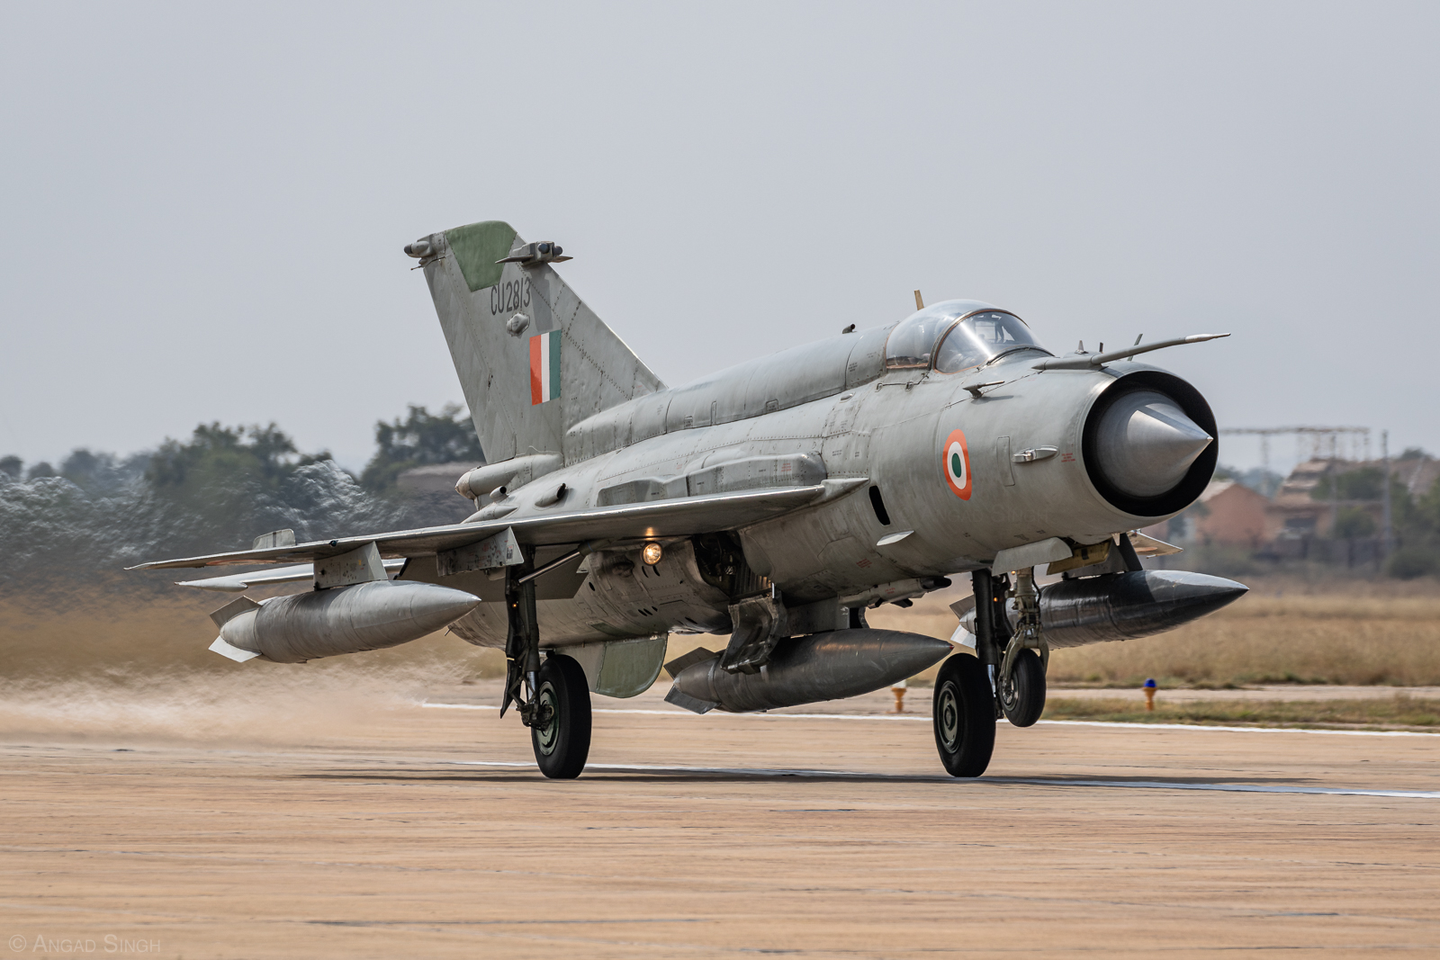 Although absent from the firepower demonstration this year, the IAF’s MiG-21 Bisons continued to operate behind the scenes. <em>Angad Singh</em>